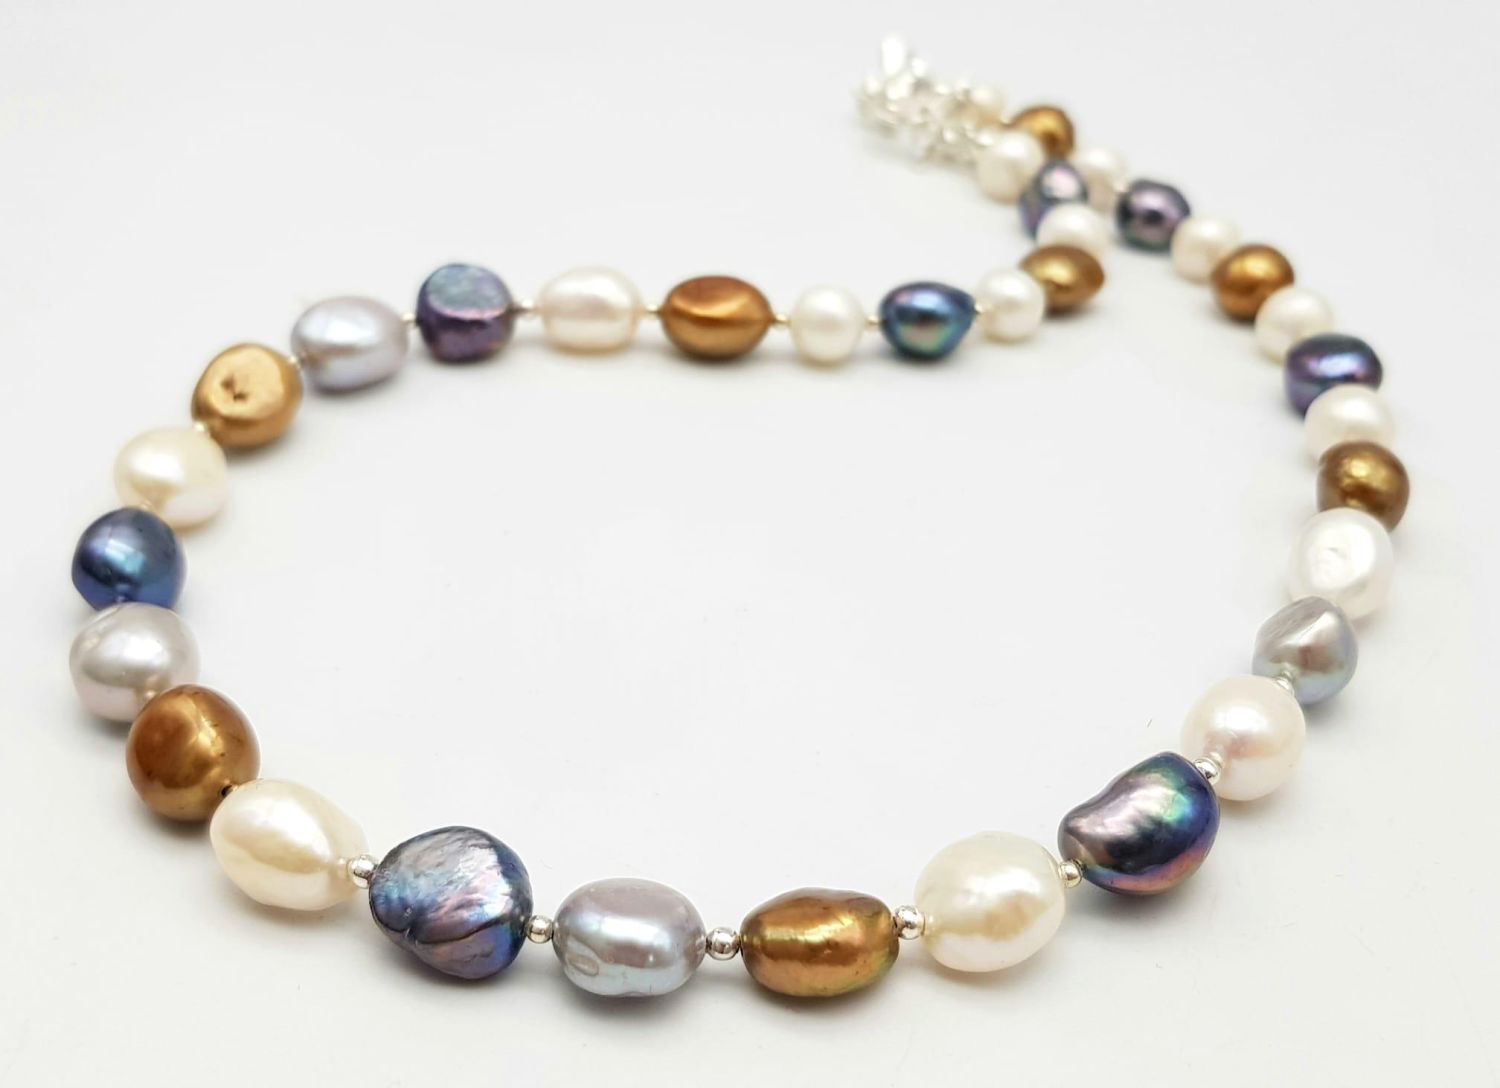 A natural, multi-coloured pearl necklace, bracelet and earrings set, in a presentation box. Necklace - Image 11 of 12